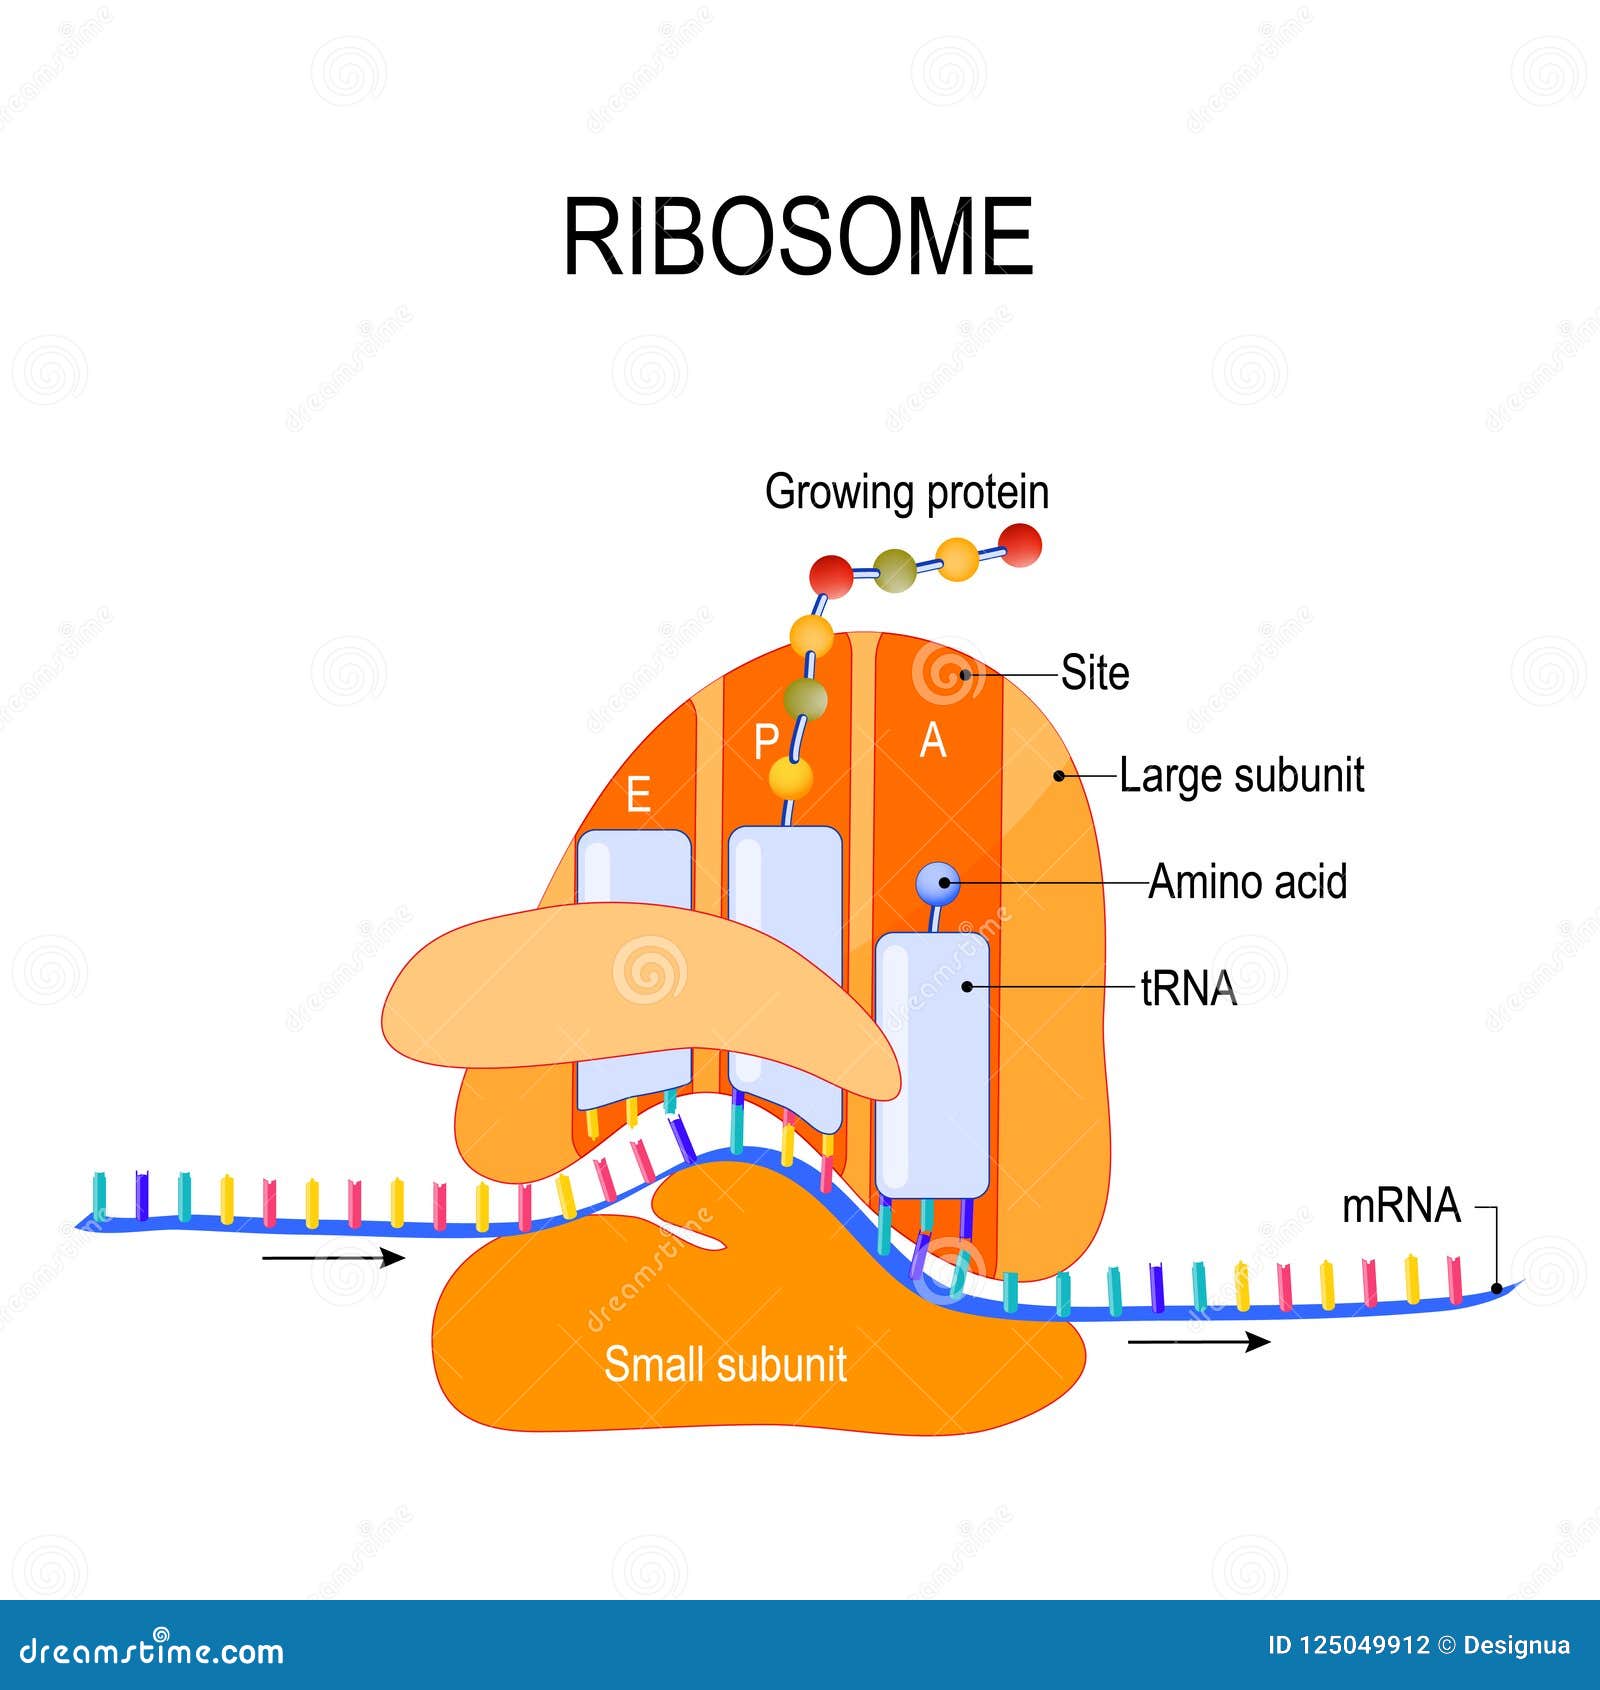 anatomy of a ribosome. the interaction of a ribosome with mrna.